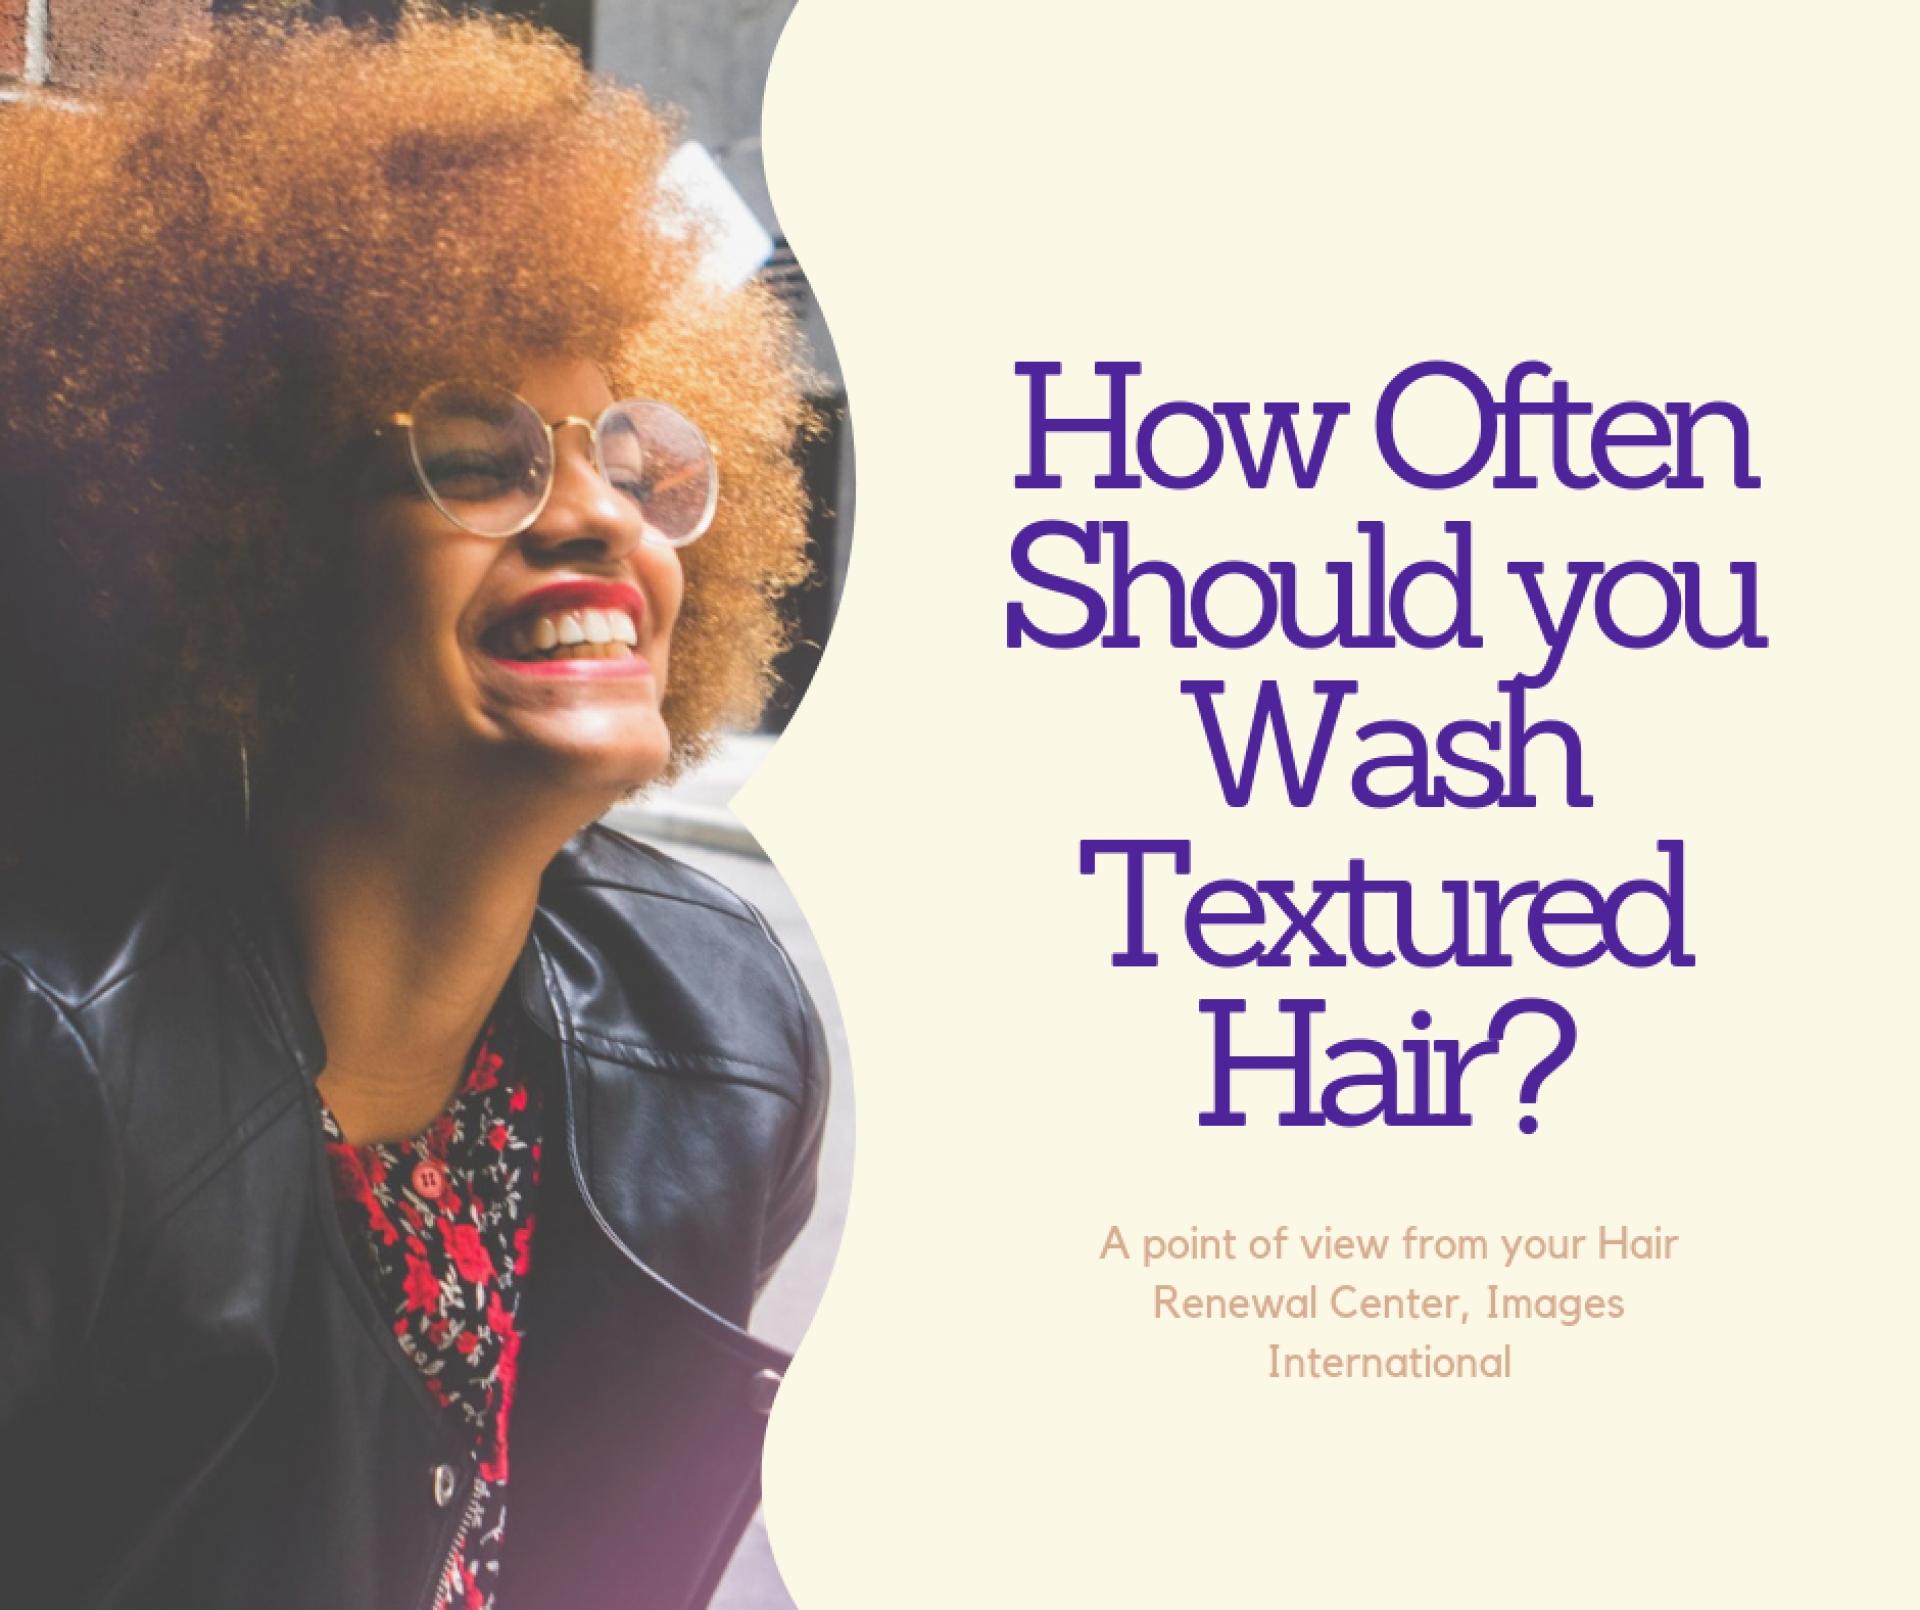 Should African American Women Wash Their Hair More Often? | Images  International